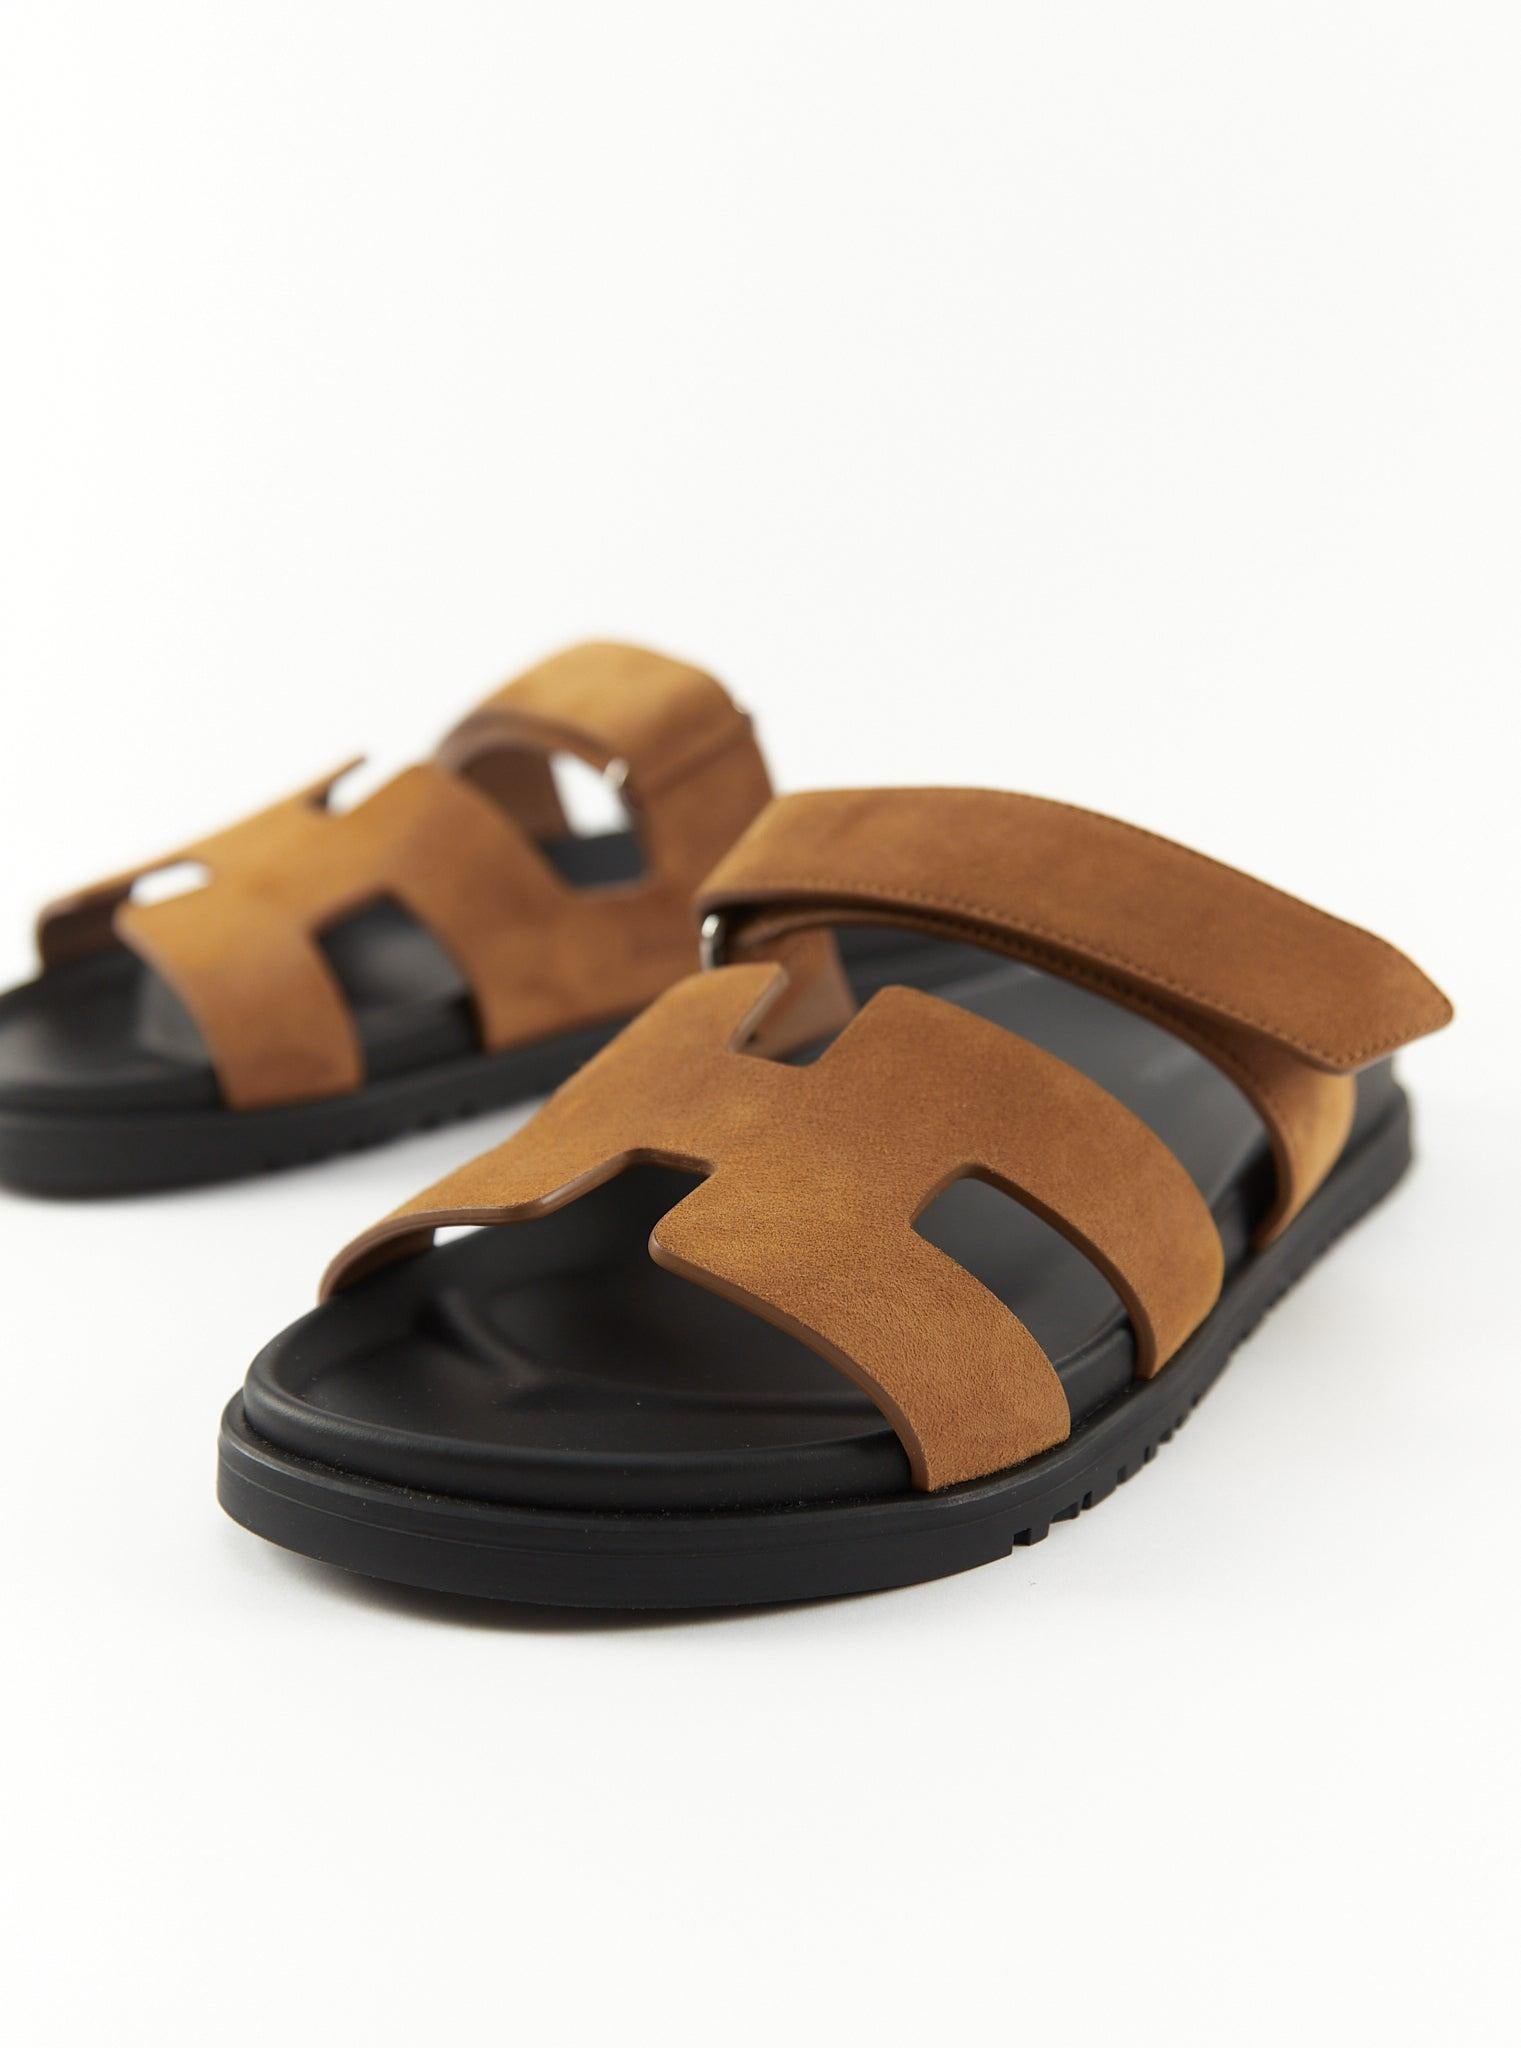 Hermès Techno-sandal in Natural

Suede goatskin with anatomical rubber sole and adjustable strap

Made in Italy

Accompanied by: Hermès box, dust bags and ribbon

Size 35